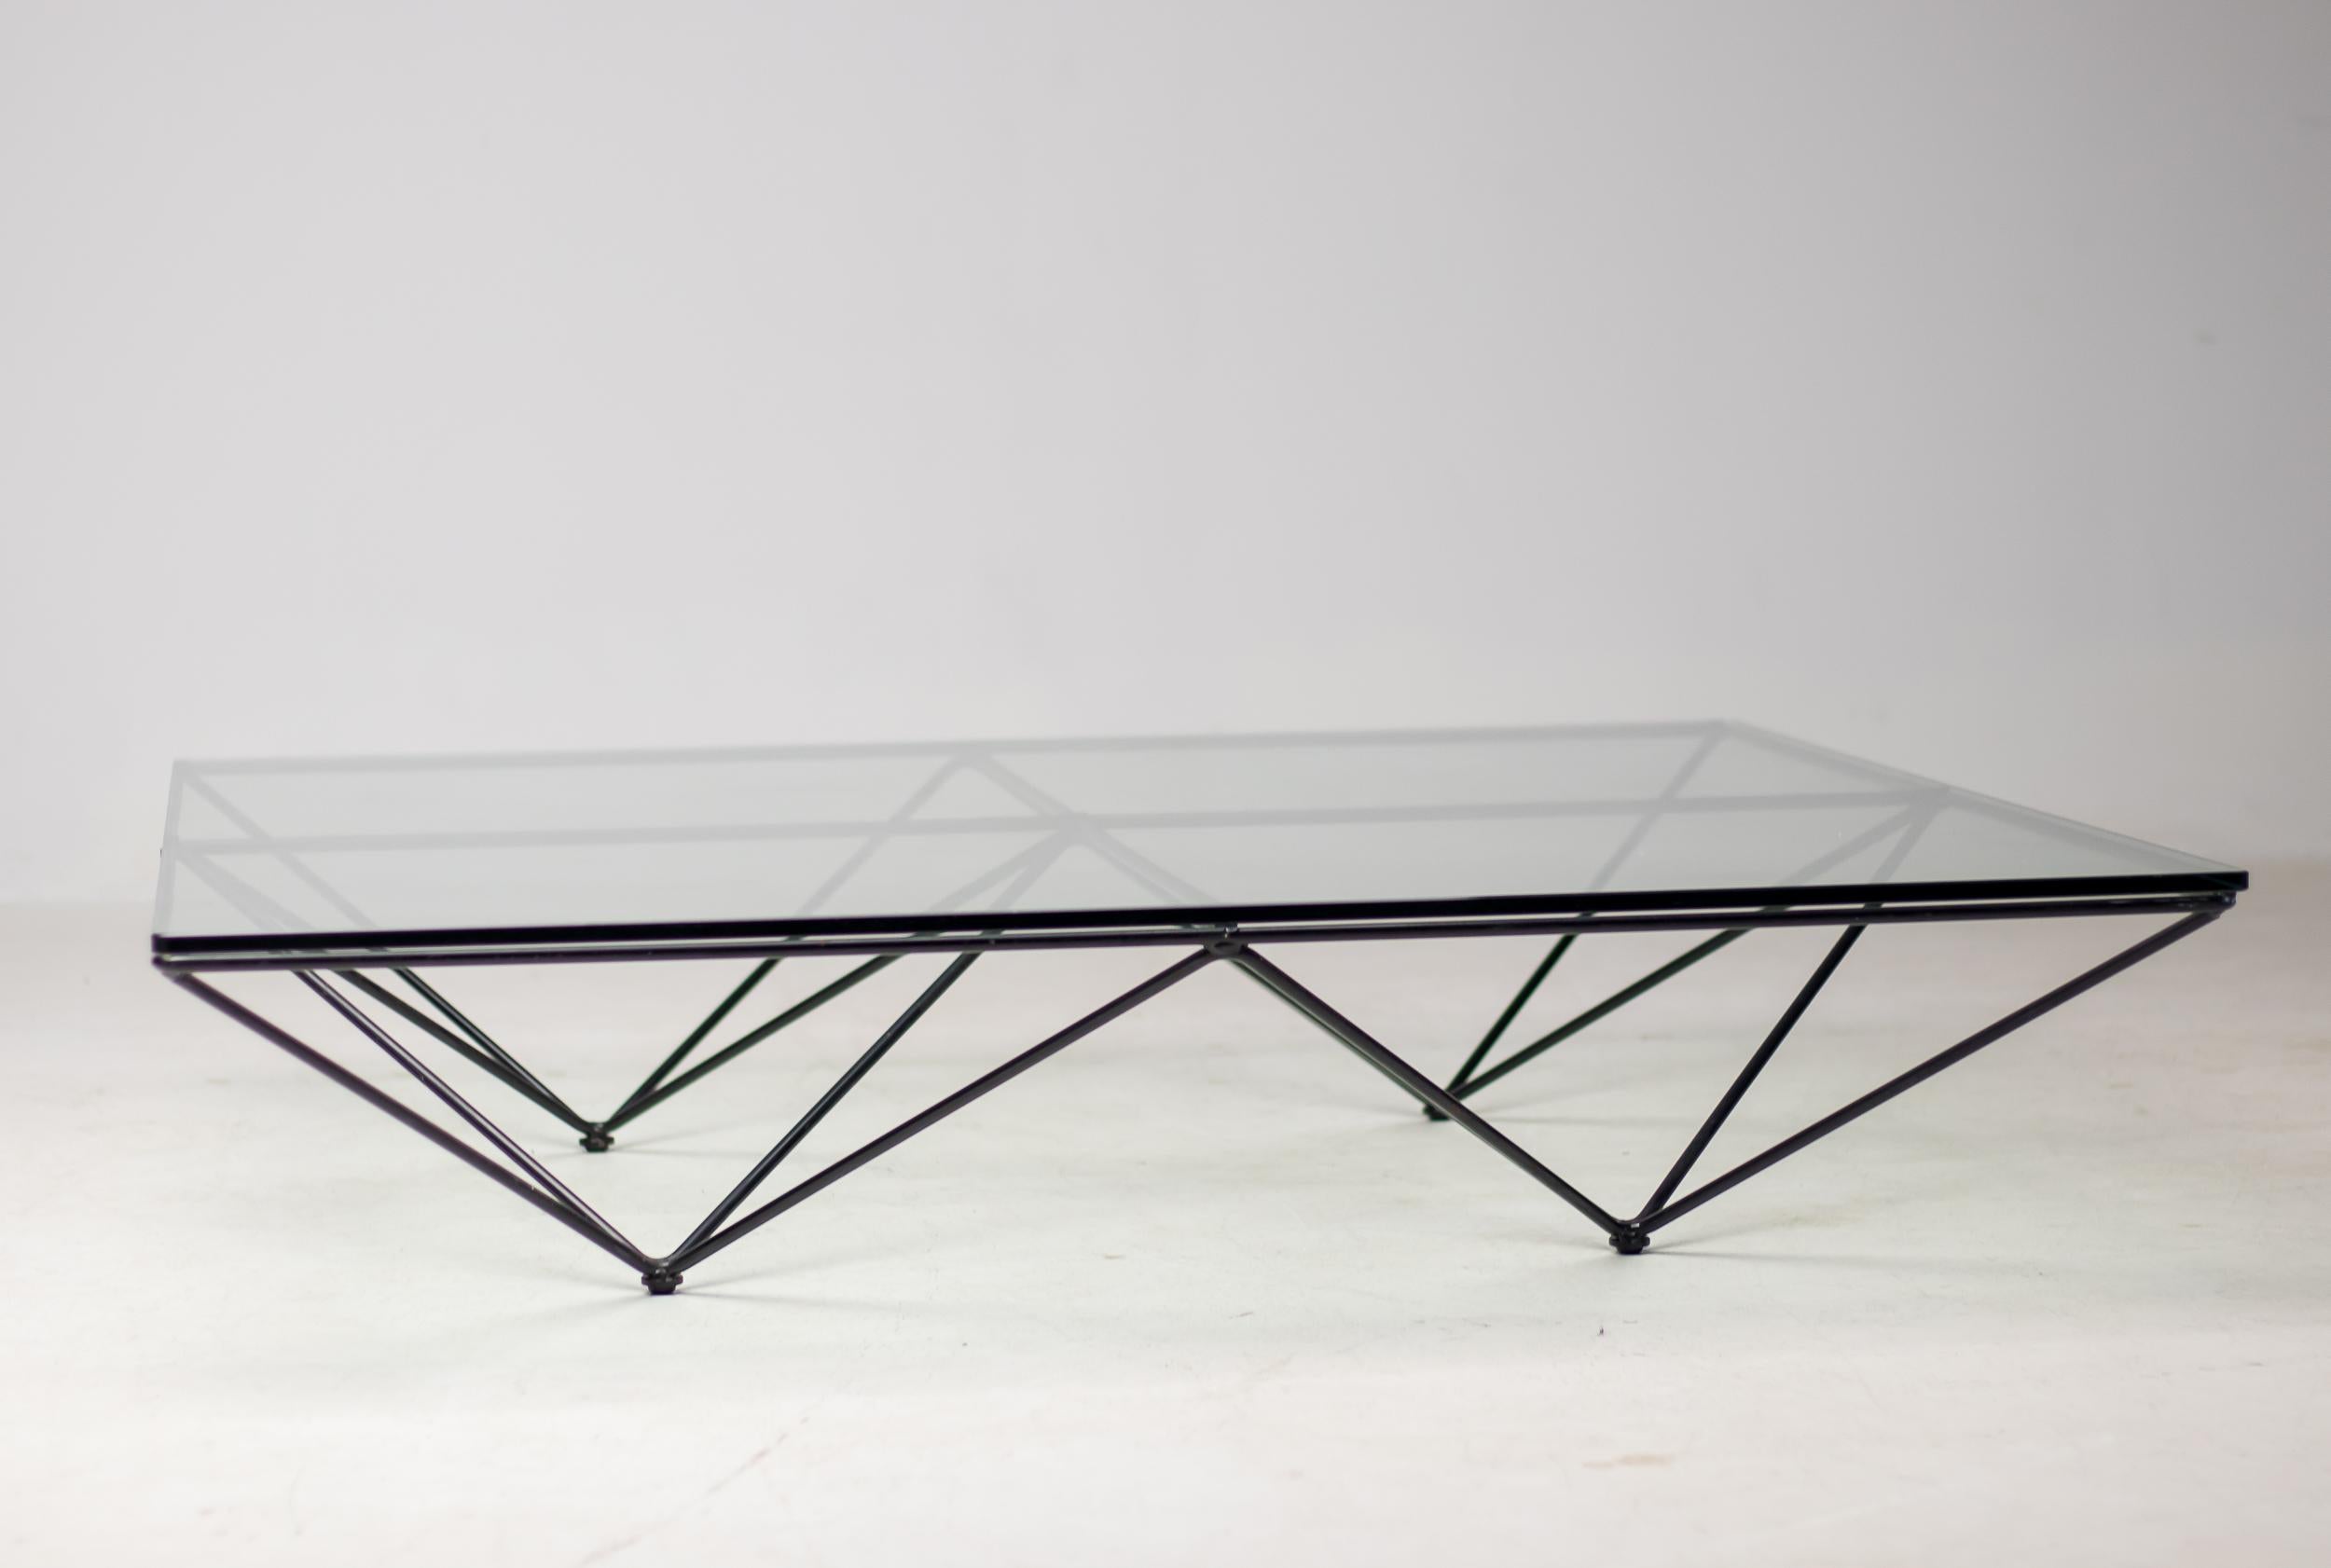 The Paolo Piva Alanda Architectural Coffee Table by B&B Italia is a stunning piece of furniture that combines sleek, modern design with functionality and durability. The table is made of high-quality materials, including a sturdy black enameled